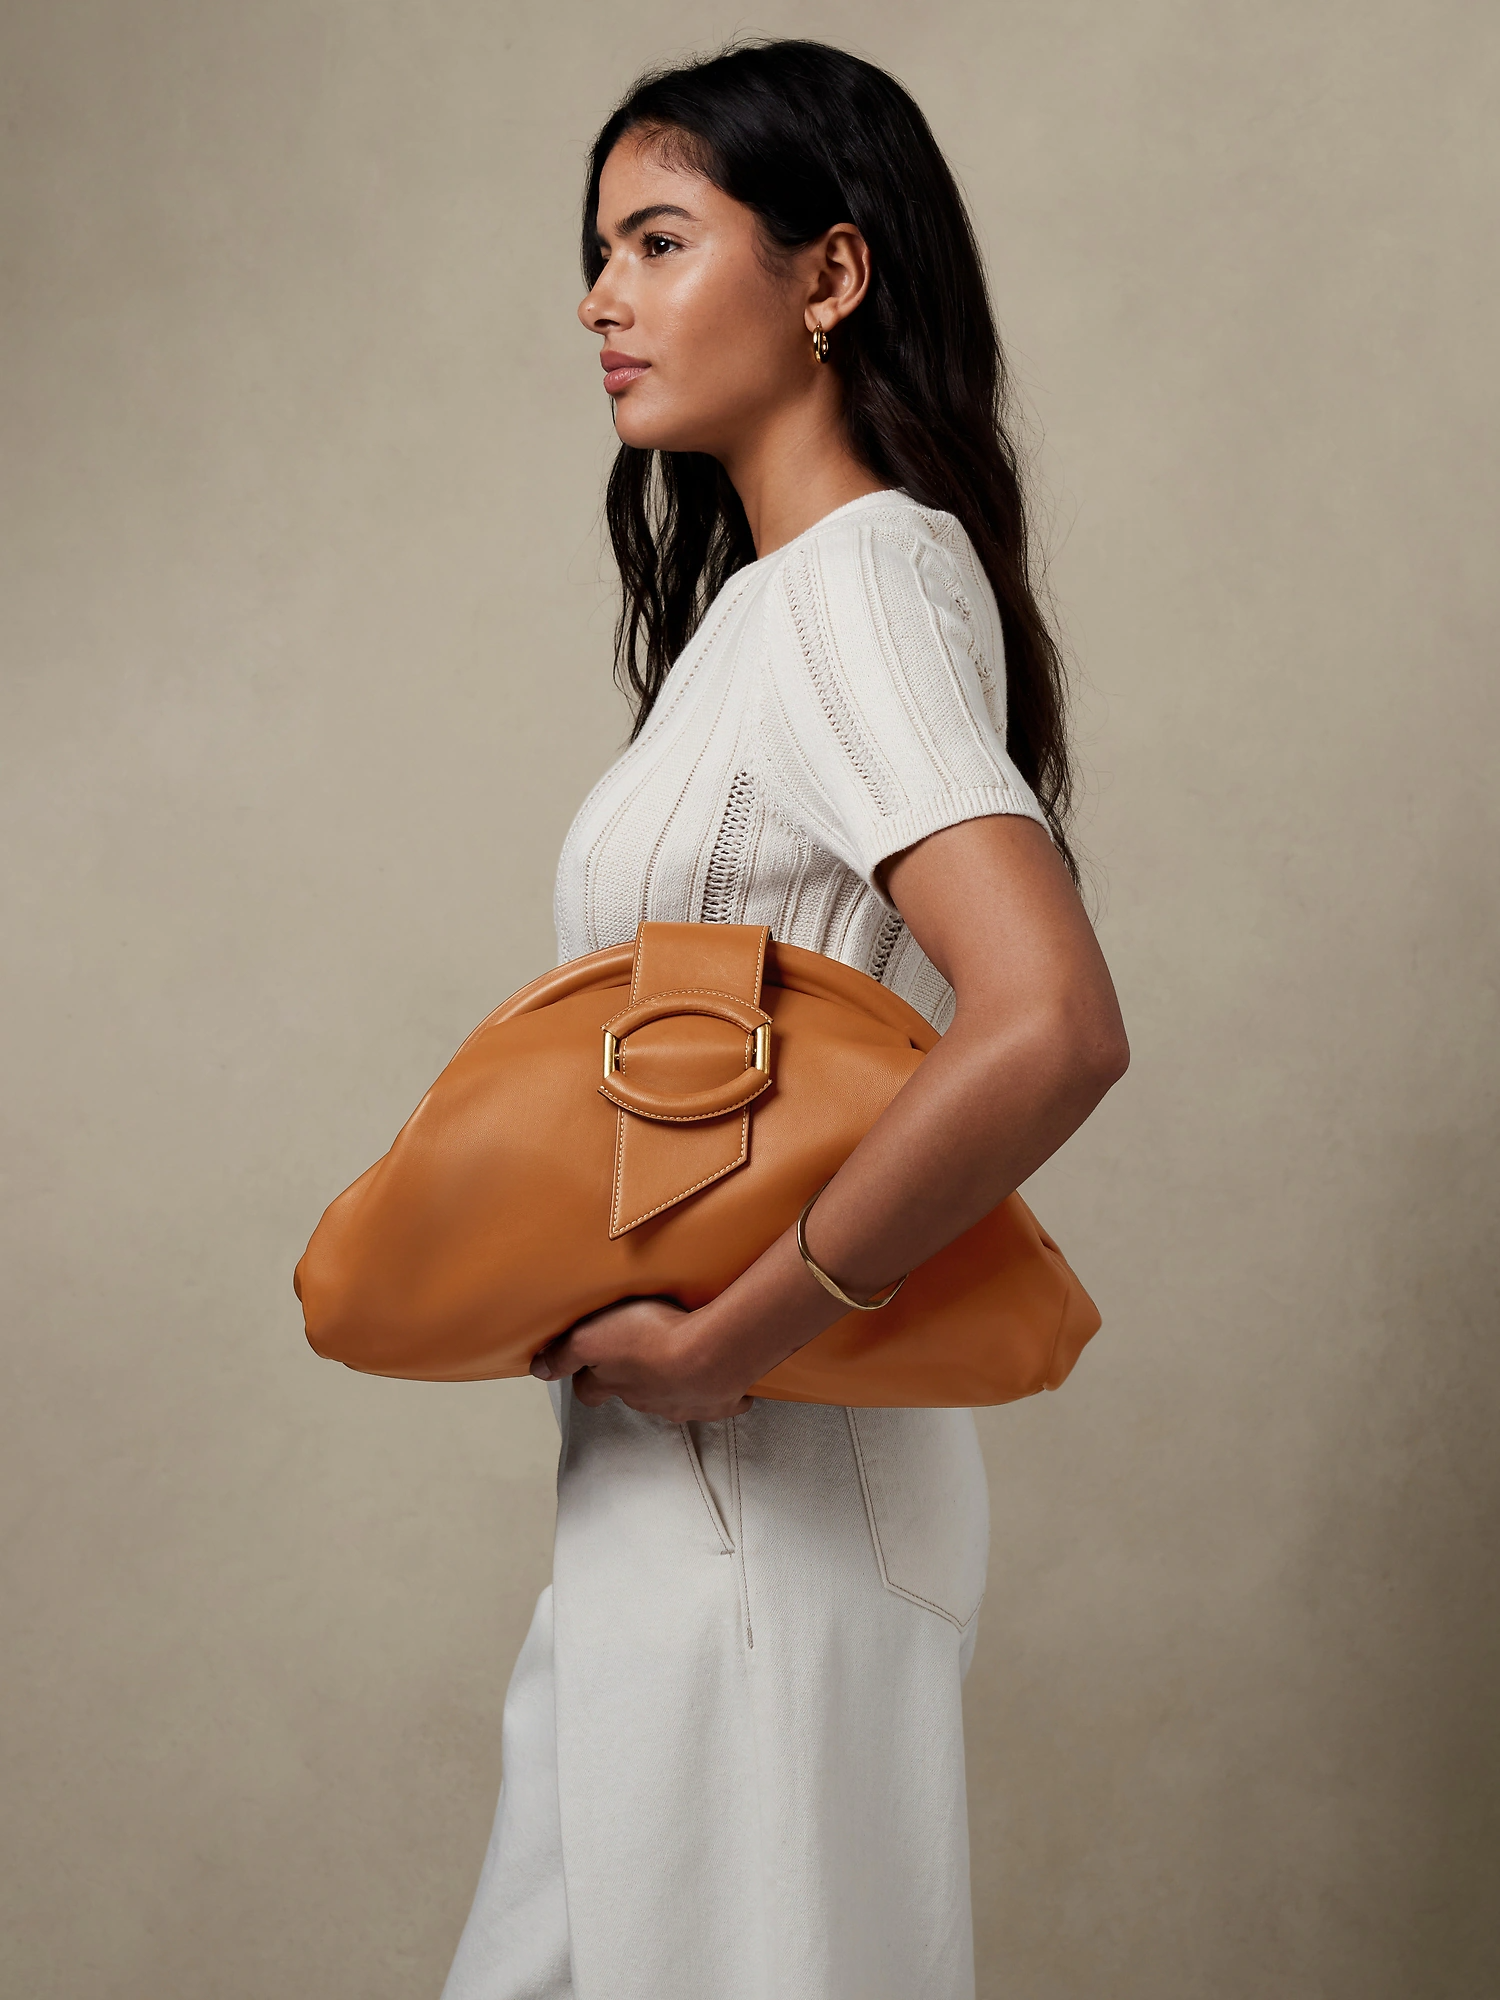 Summer Handbag Trends 2023: Styling for Work and Weddings